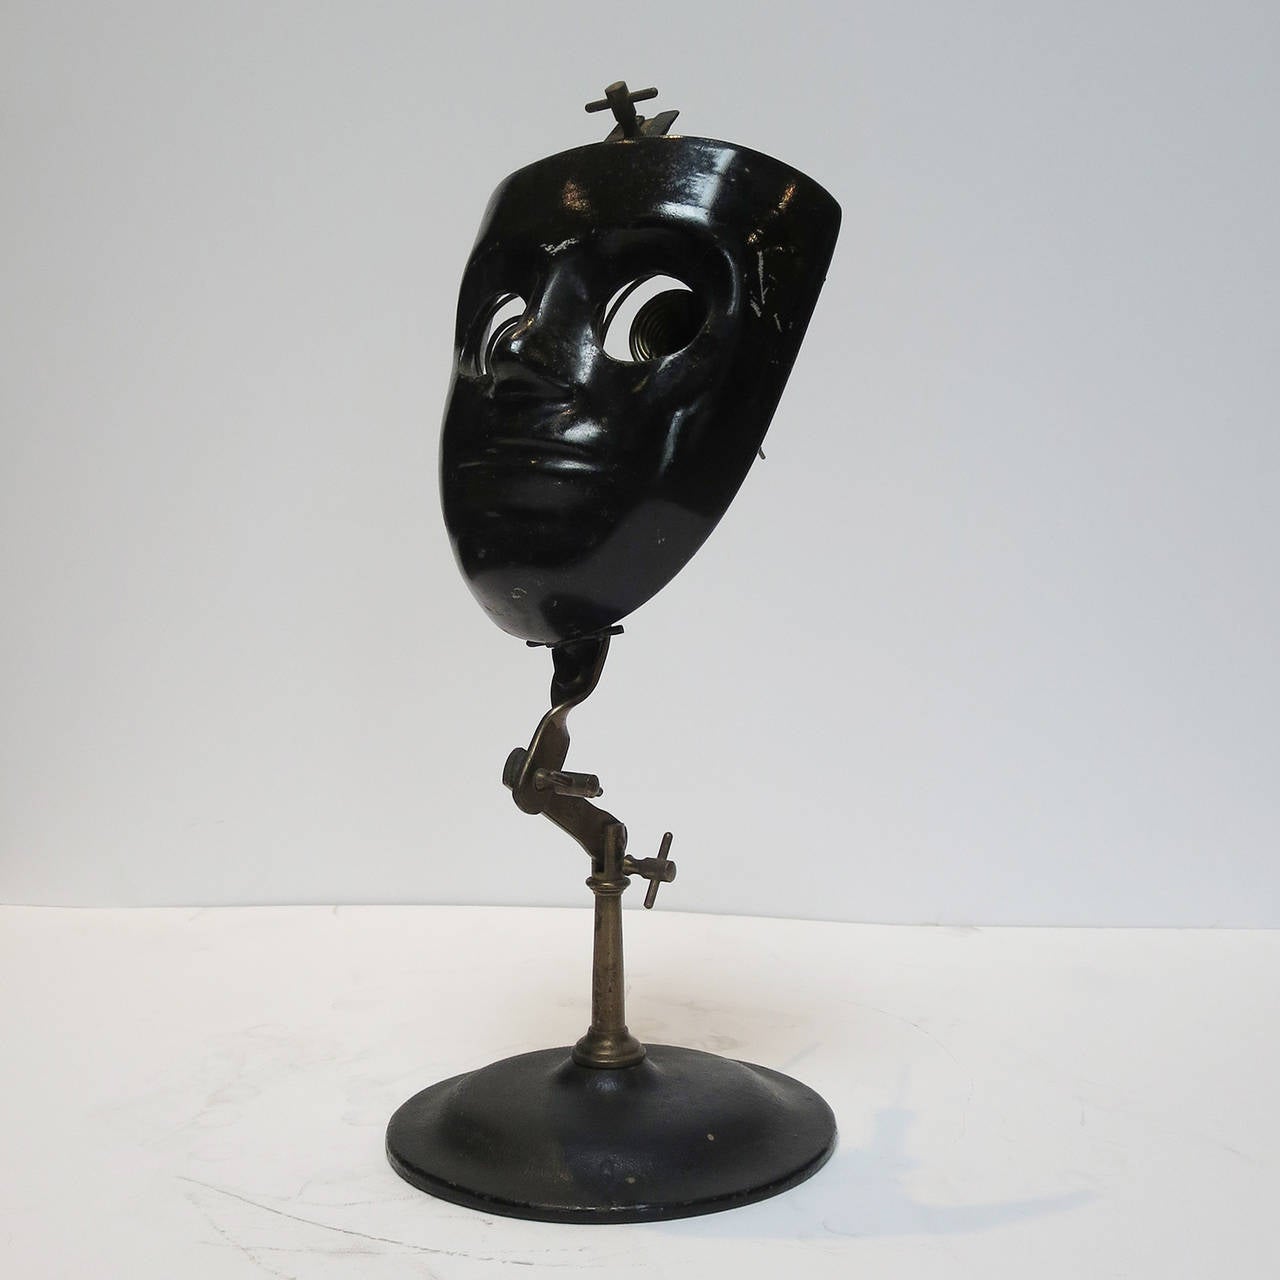 Used in the late 1800s-early 1900s, this painted metal mask was used in training budding eye surgeons. Pig’s eyes were inserted into the clamps in the eye cavities, allowing the student to perfect his surgical cutting technique. There are various